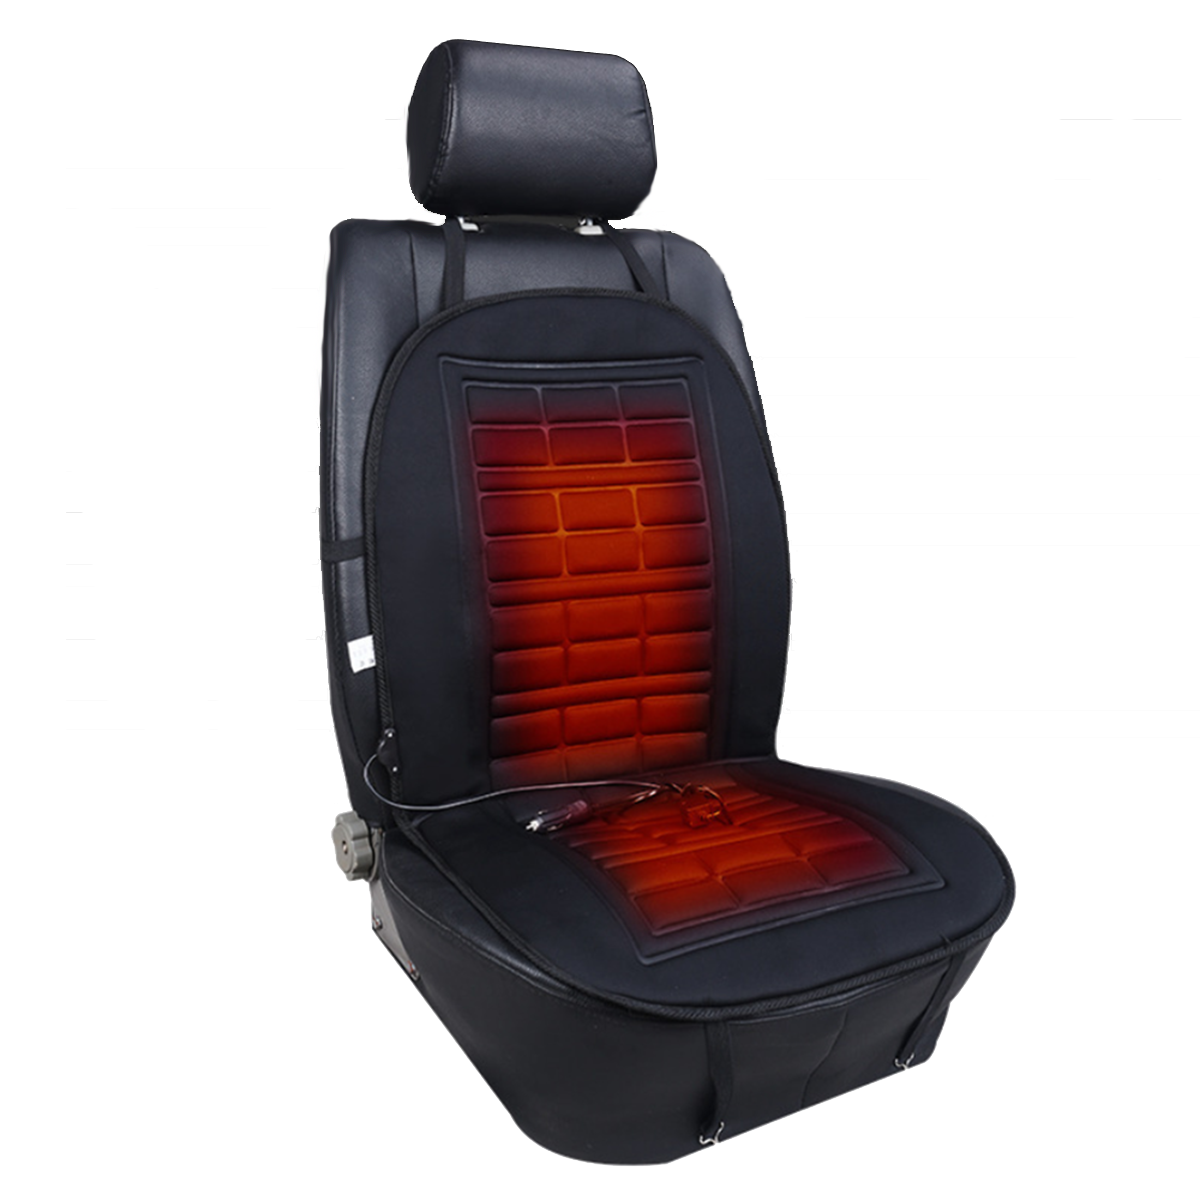 12V Auto Car Heated Front Seat Cushion Cover Heating Heater Warmer Pad Winter